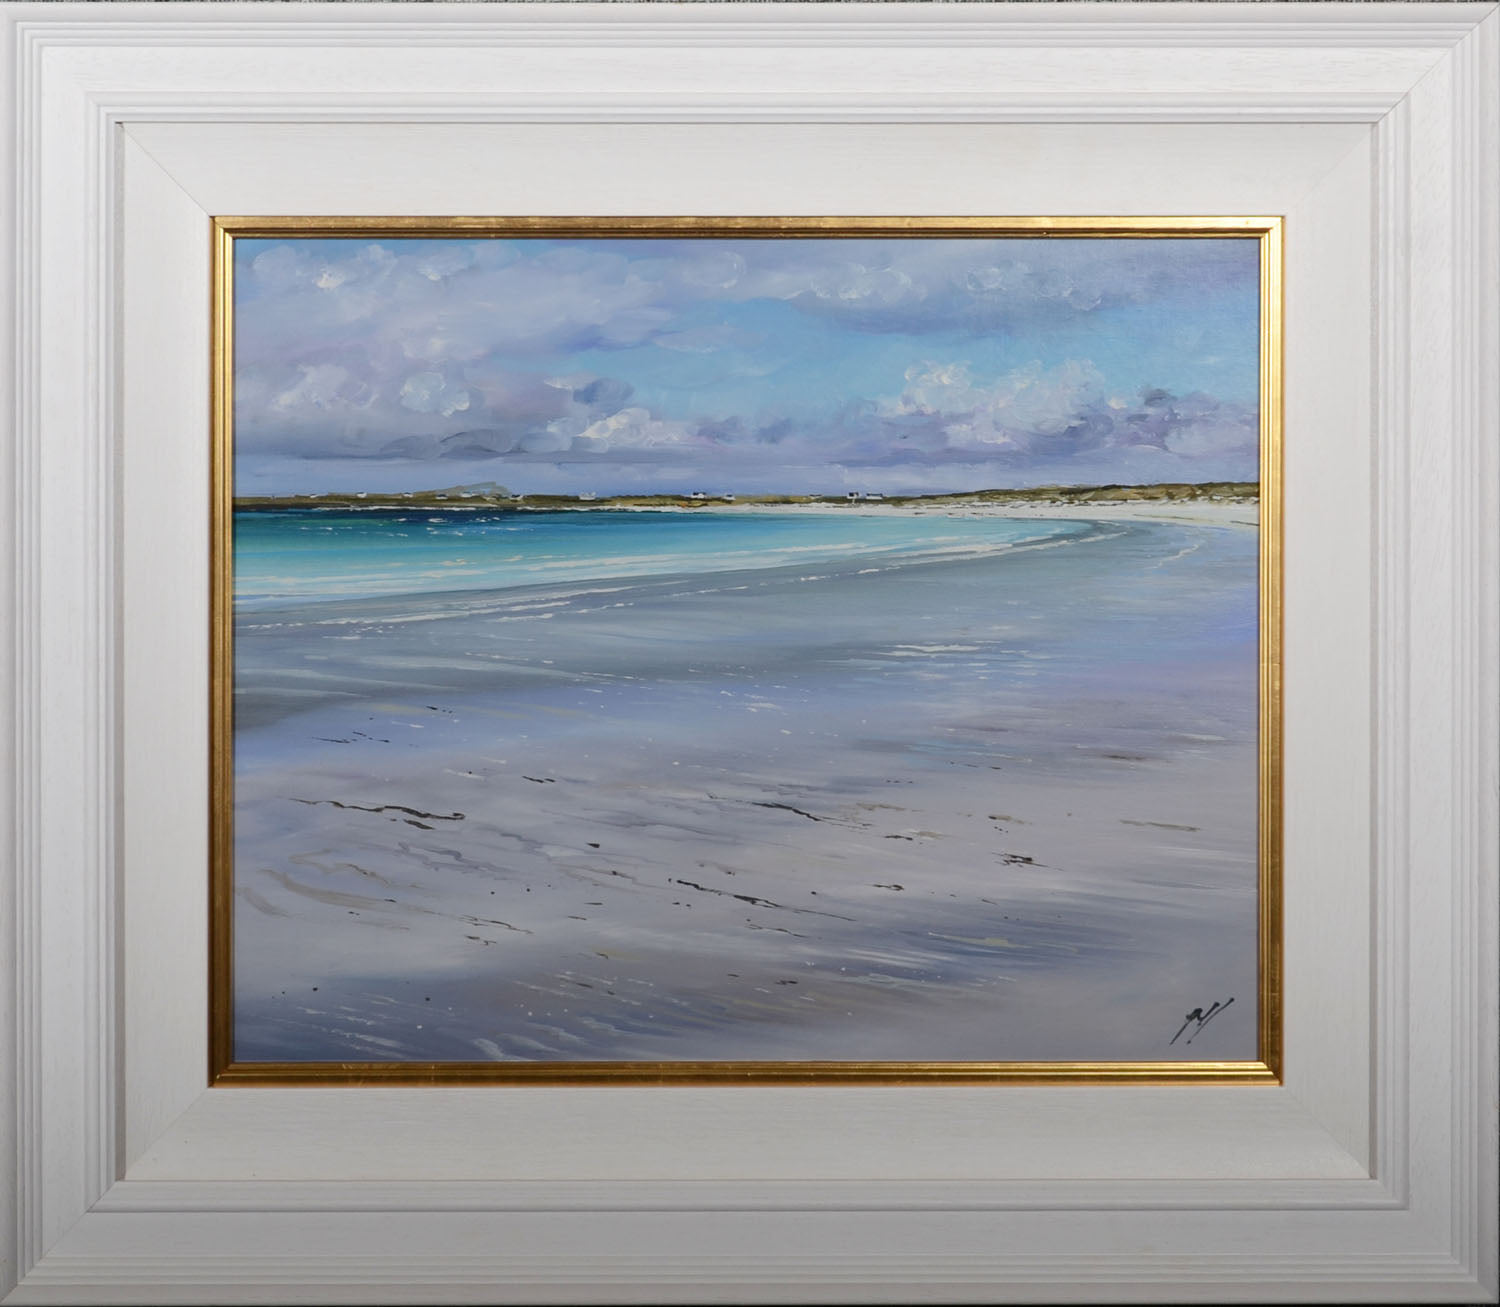 Allison Young - Turquoise Sea, Tiree